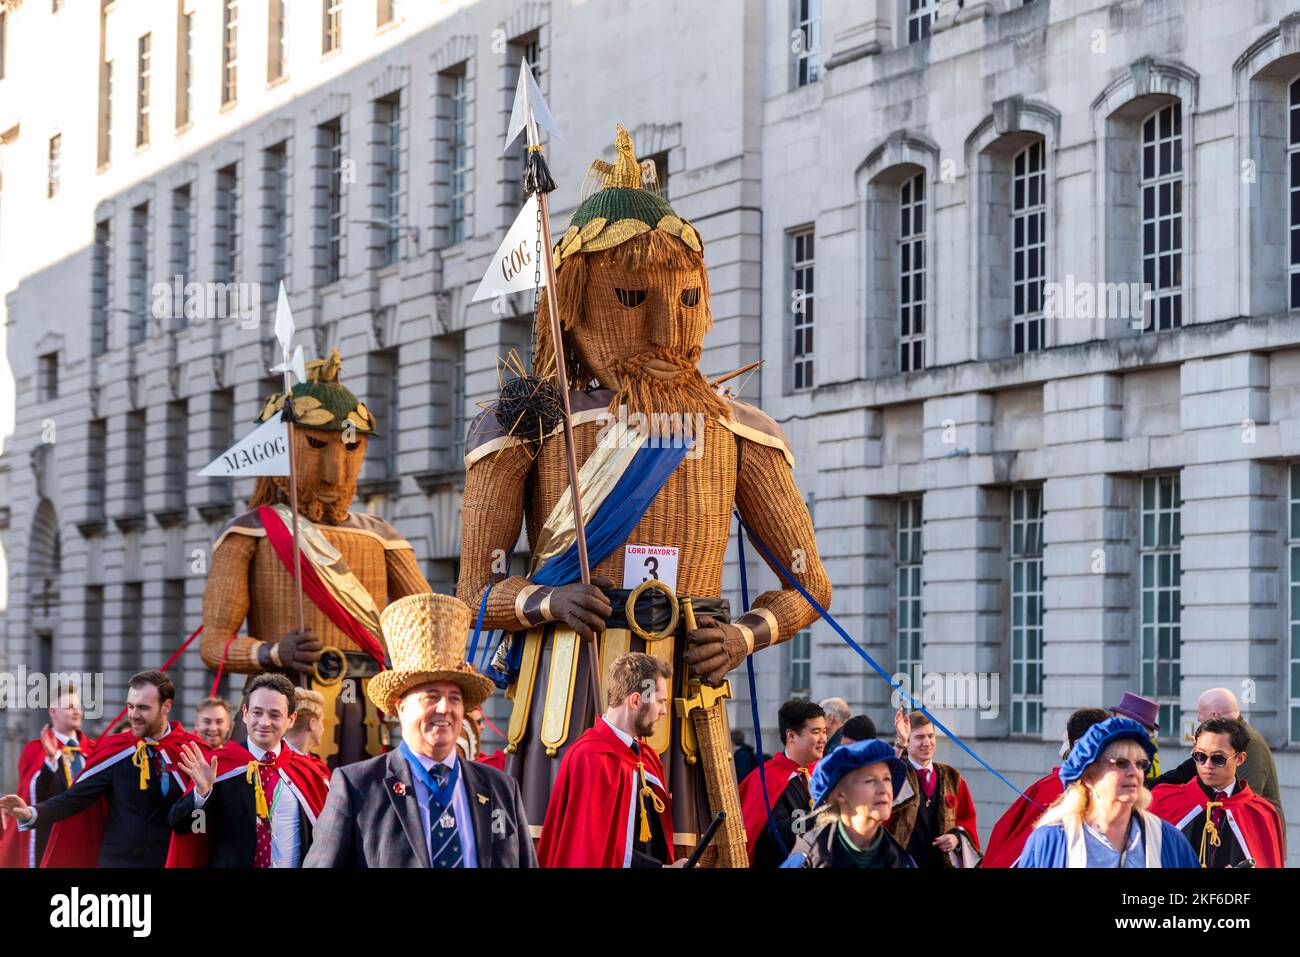 GOG AND MAGOG/GUILD OF YOUNG FREEMEN AND BASKETMAKERS at the Lord Mayor's Show parade in the City of London, UK Stock Photo